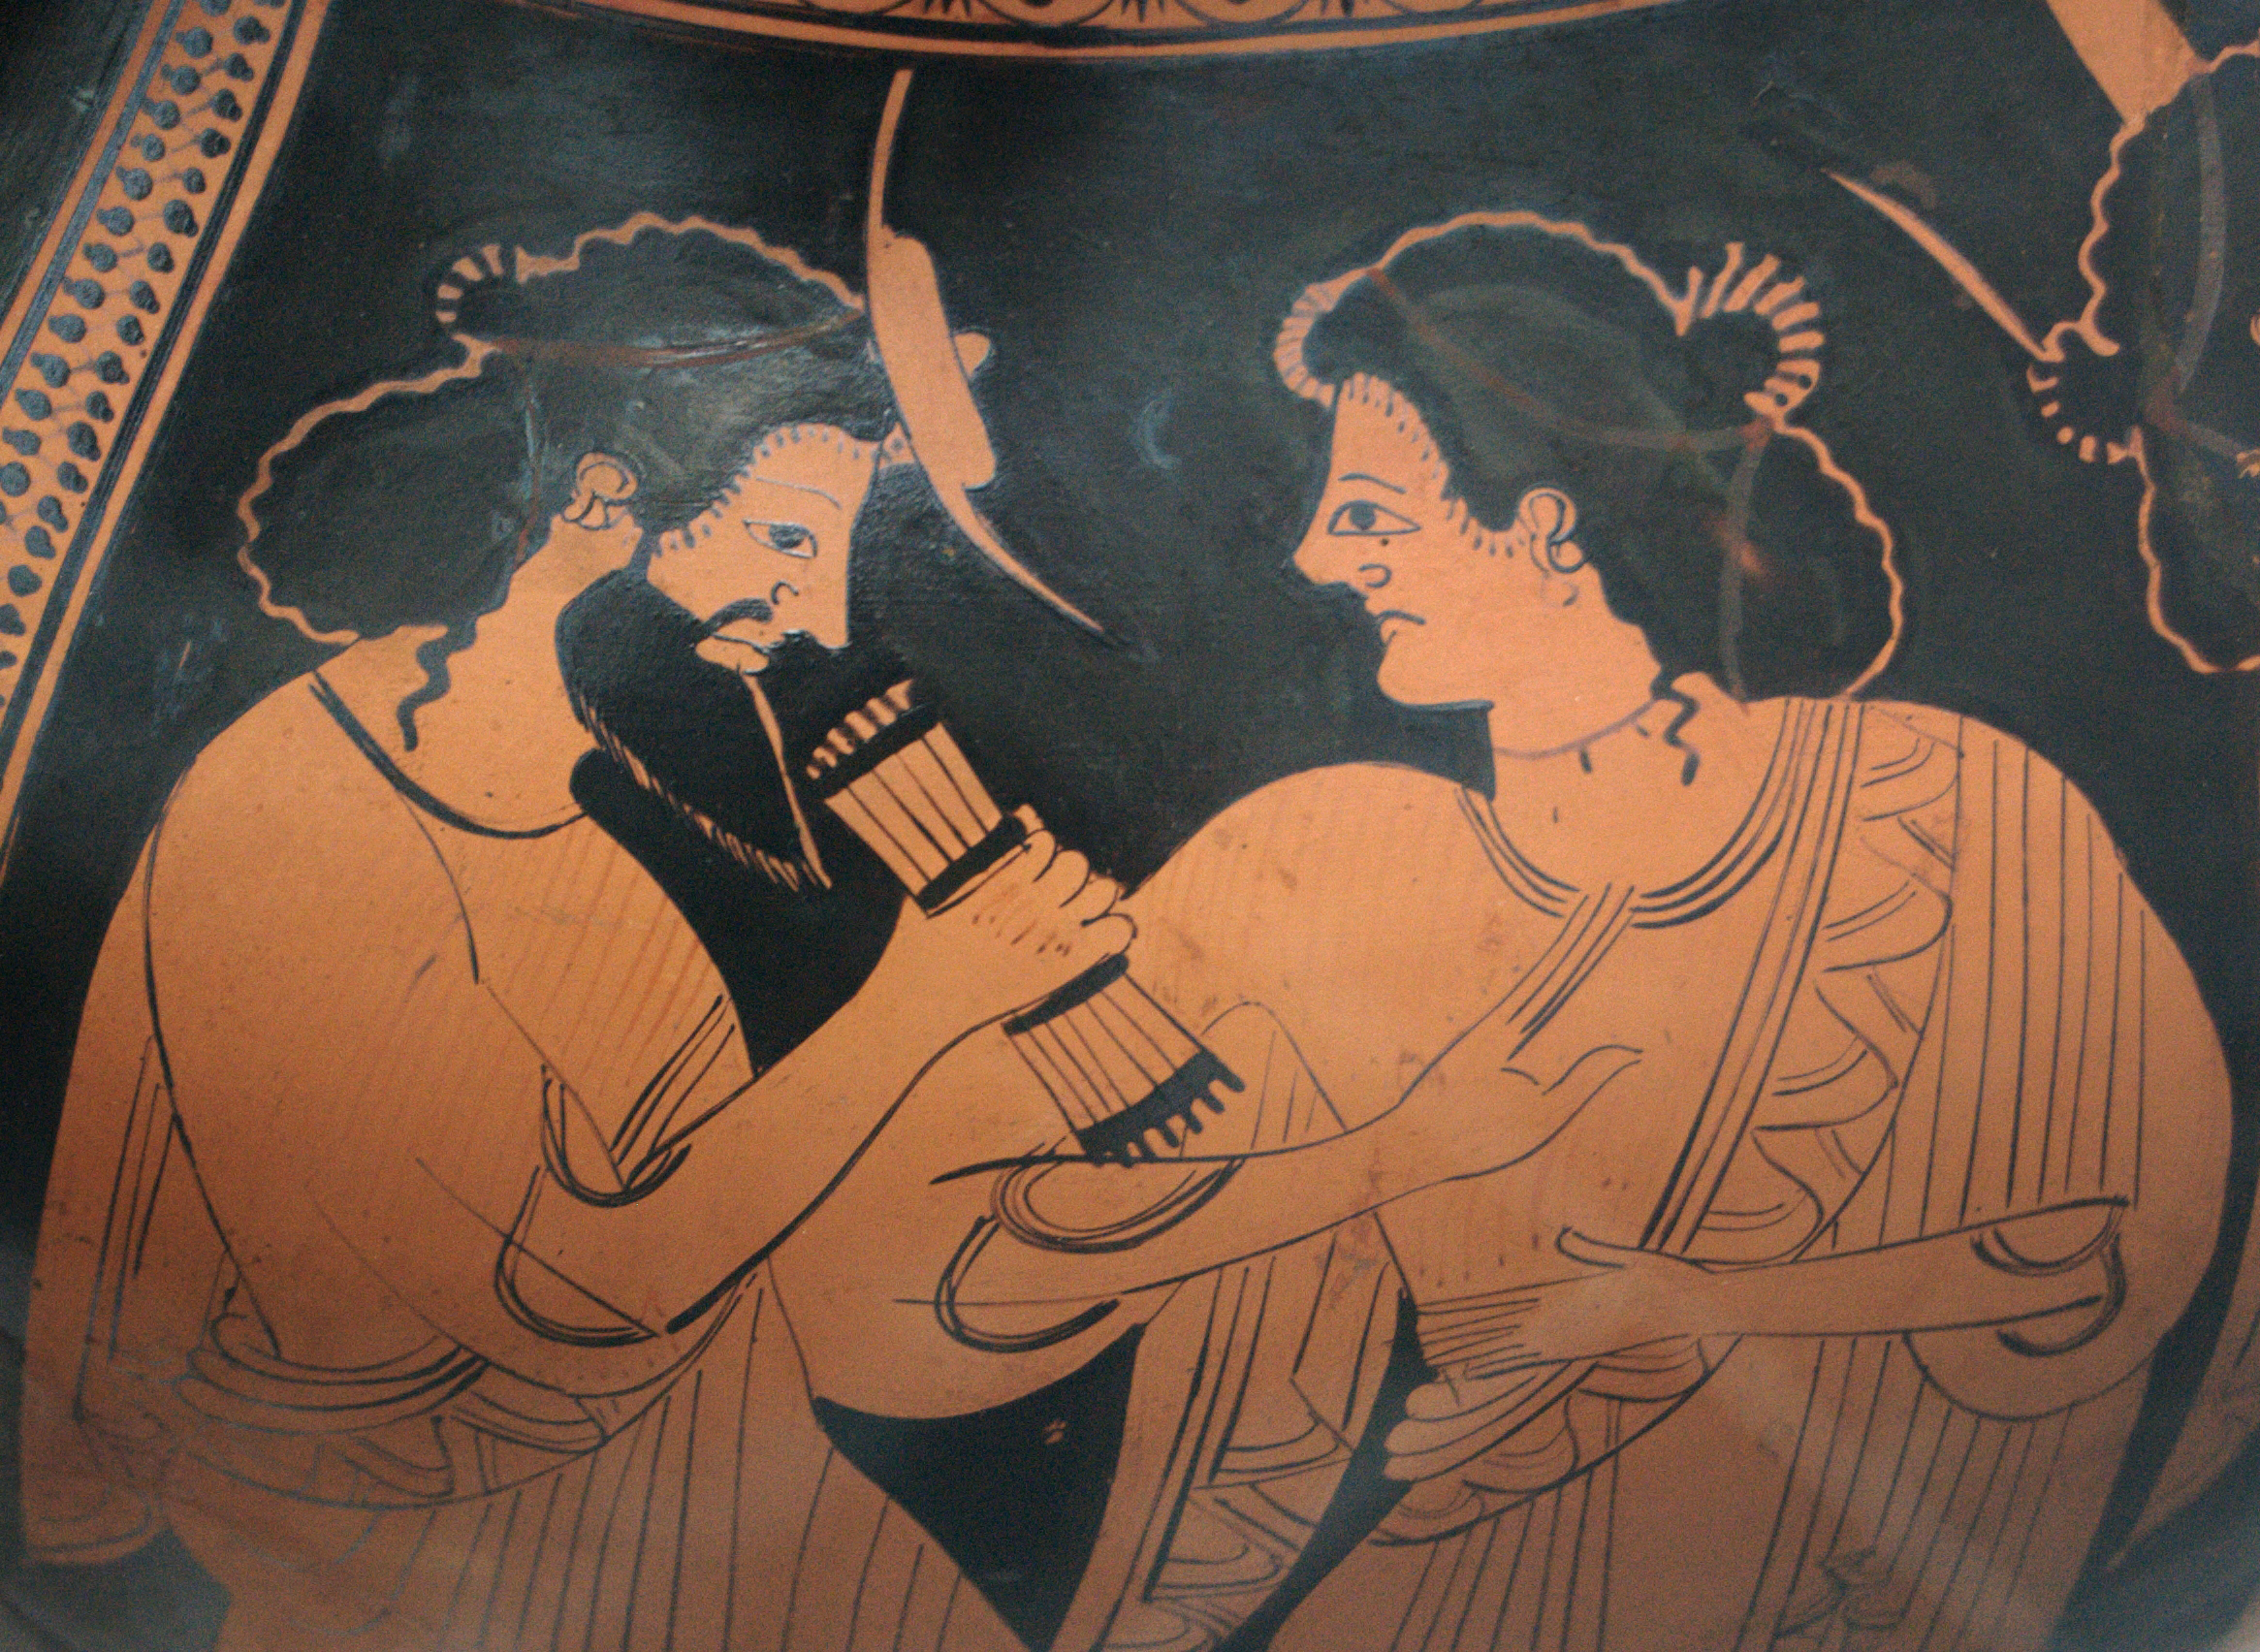 Bearded Hermes standing beside his mother Maia. Hermes holds a strange scroll or bundle of sticks in his hand.